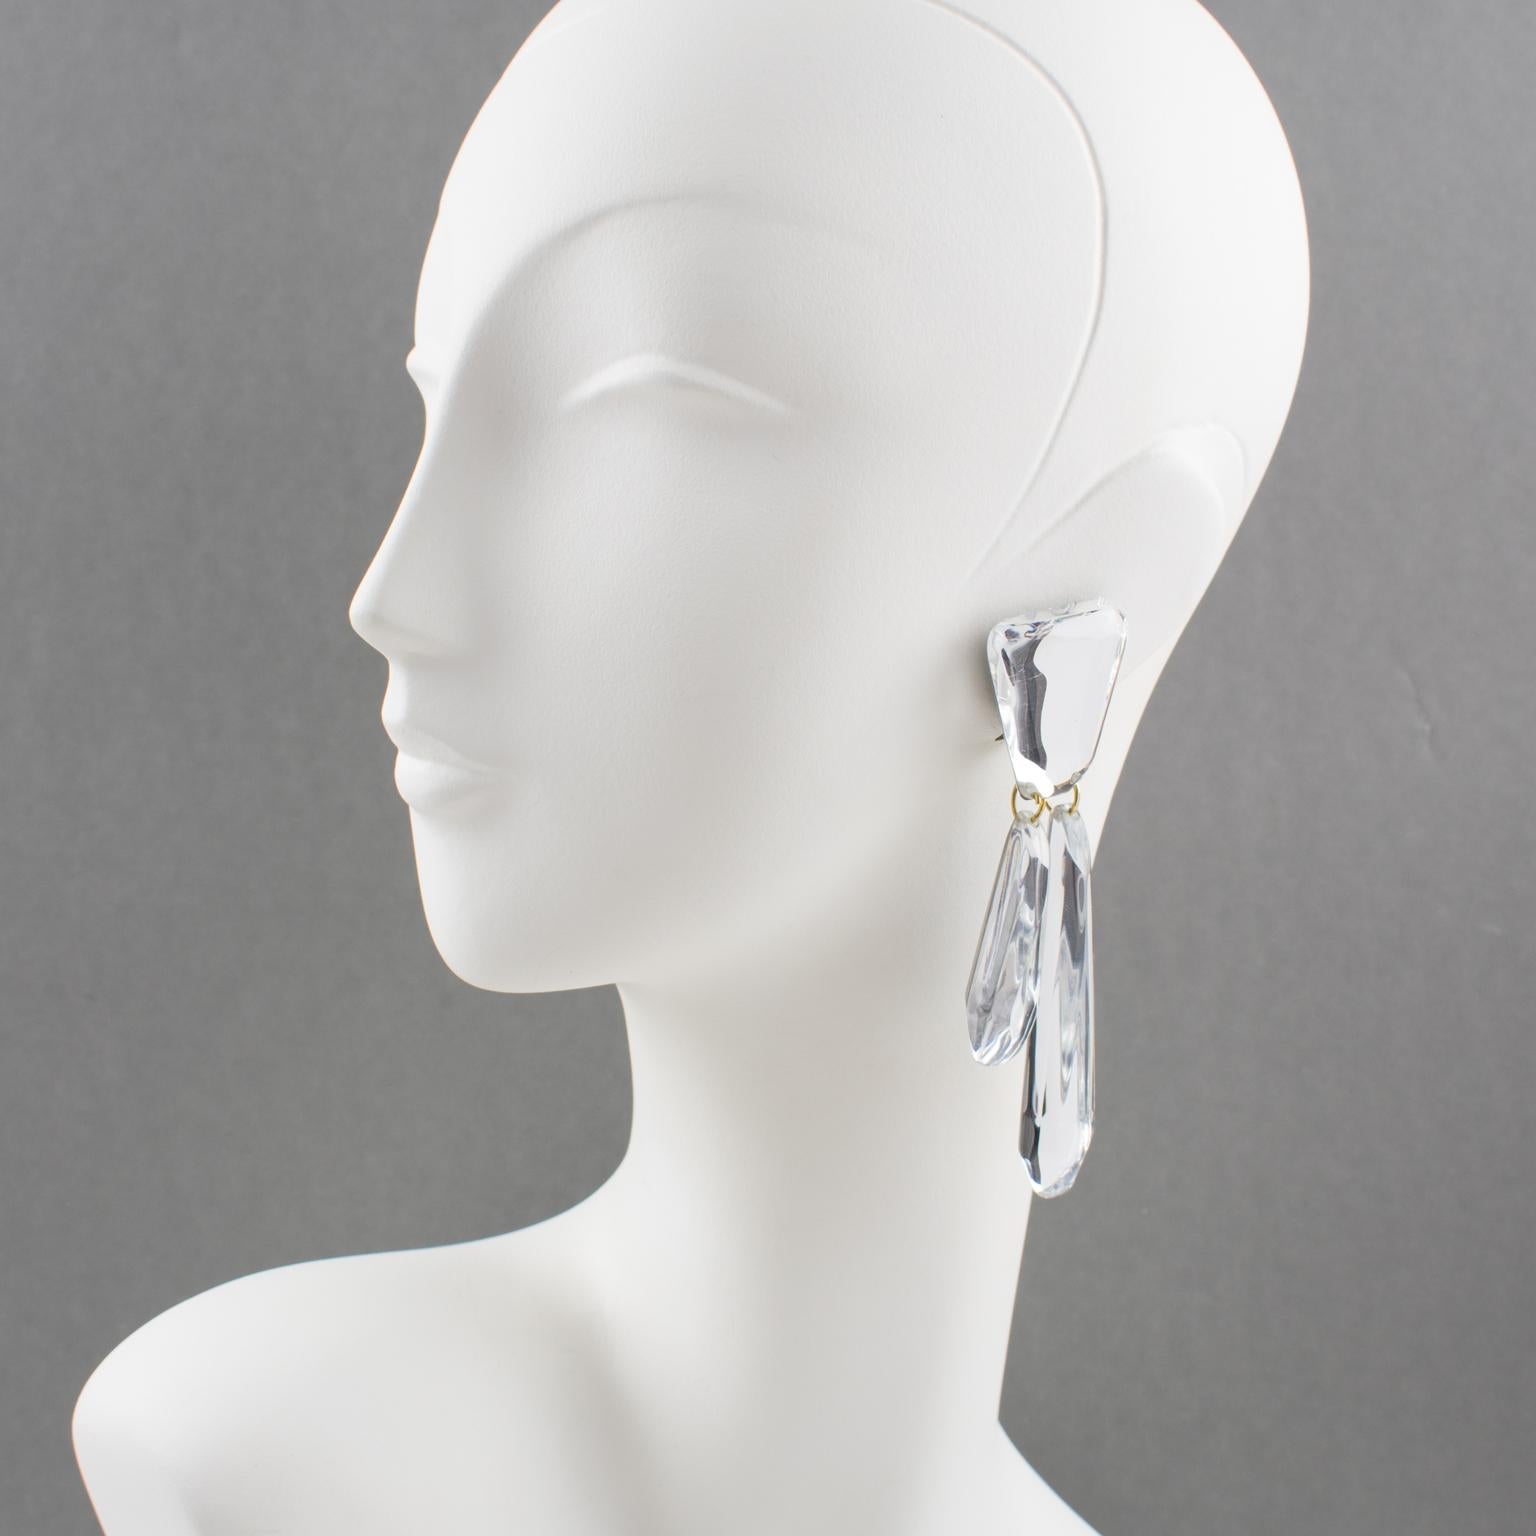 Harriet Bauknight for Kaso designed these elegant oversized dangling chandelier Lucite clip-on earrings. The dimensional geometric shape boasts dangling charms with a mirror-textured pattern and classy silver glitter color. The Kaso brand sticker